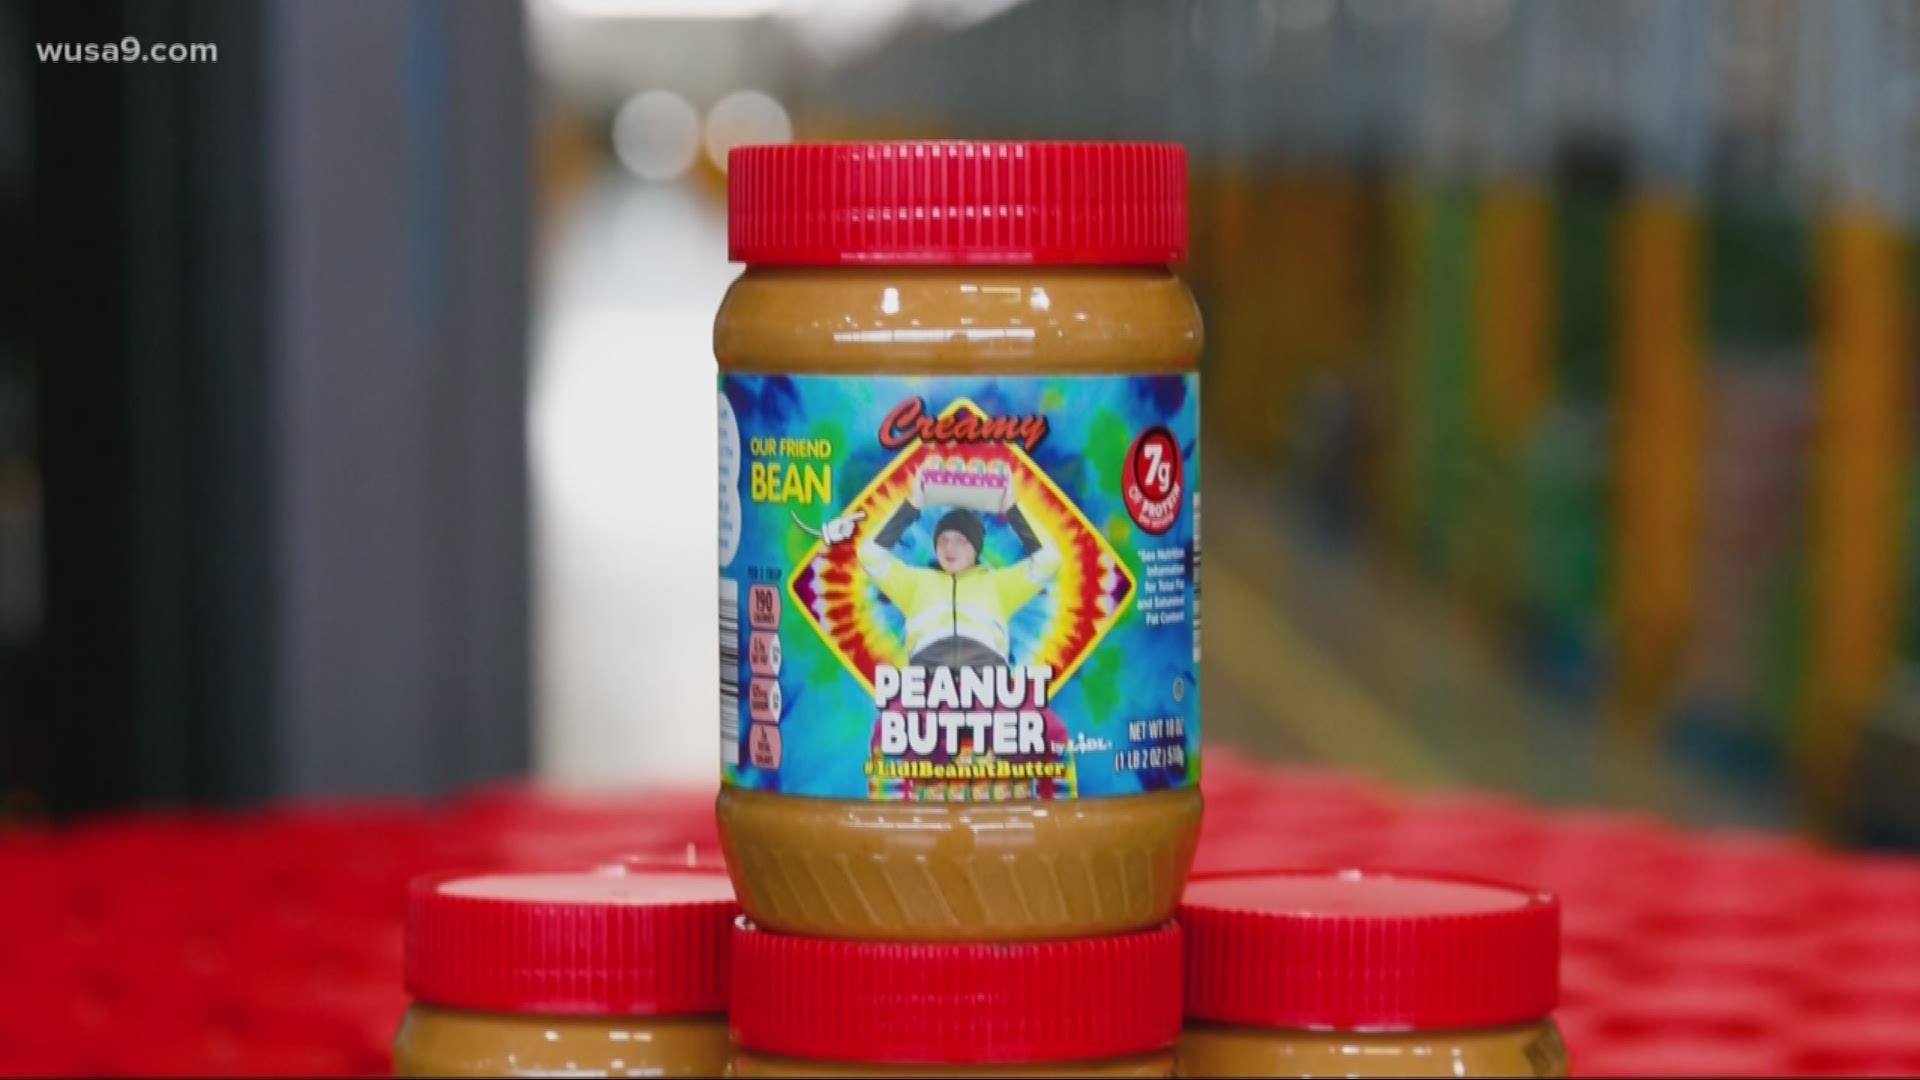 On this Autism Awareness Day -- the grocery store unveiled a special, limited edition peanut butter jar -- with a special guy's face on the label.